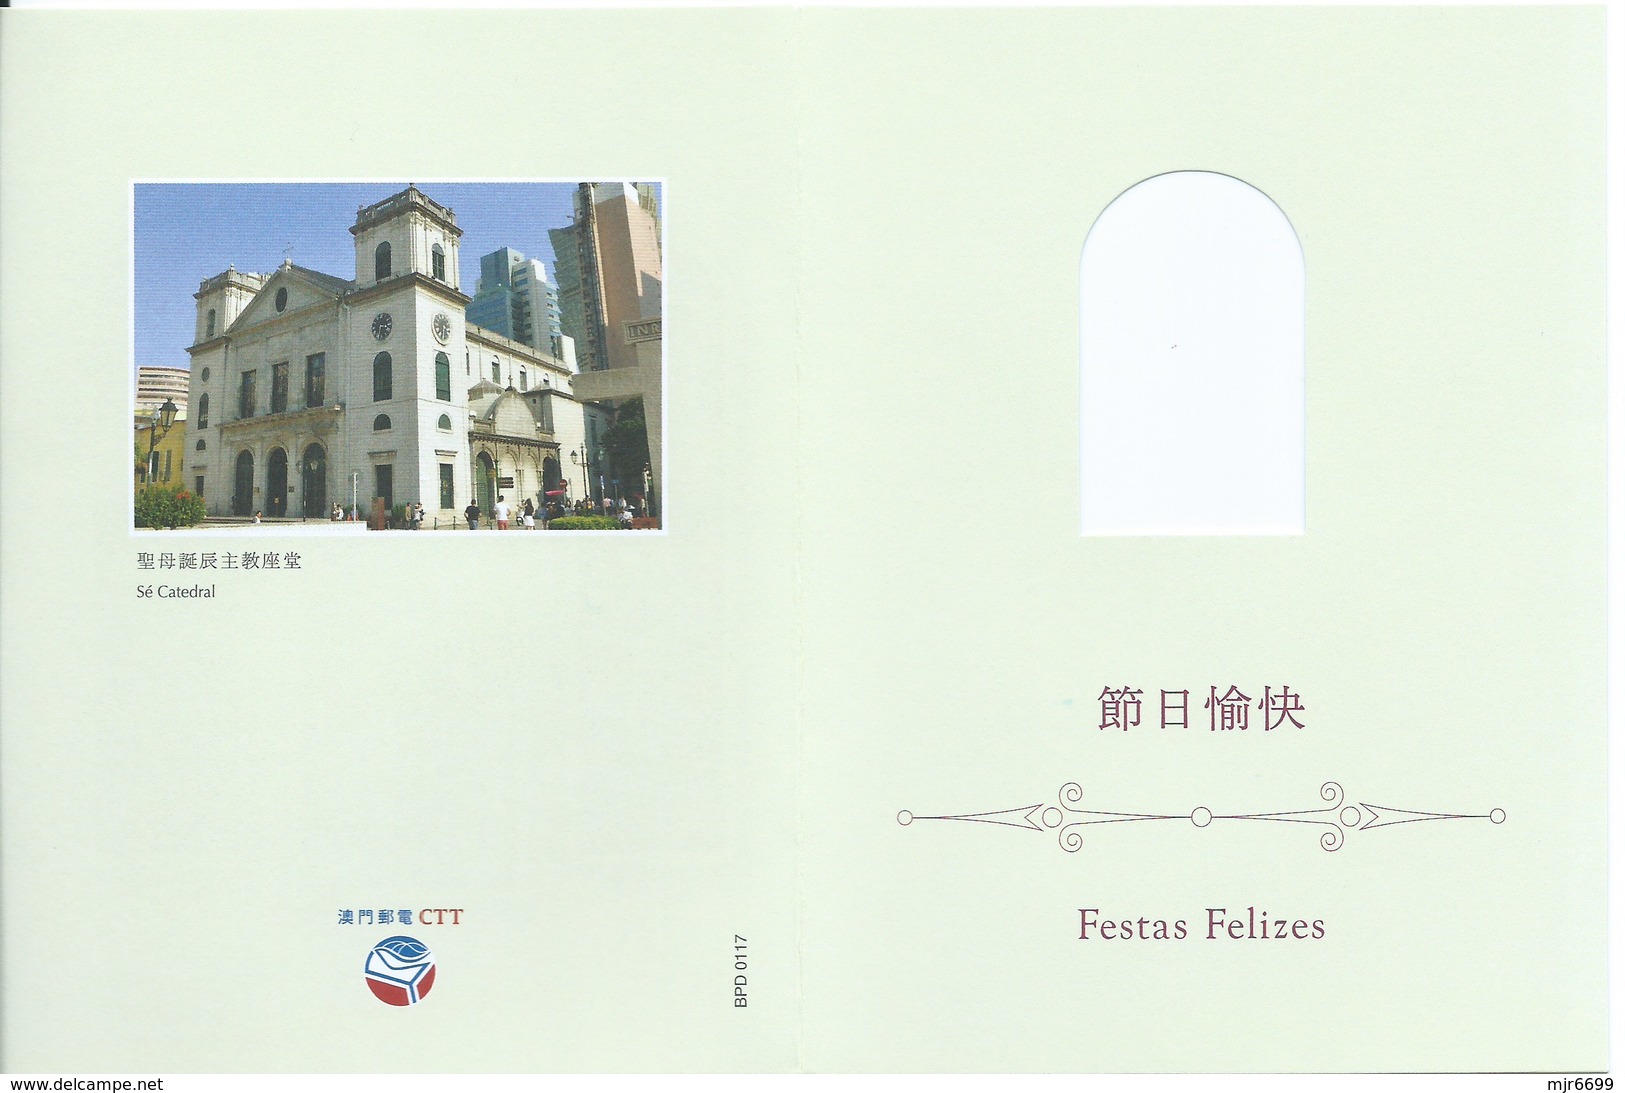 MACAU 2018 CHRISTMAS GREETING CARD & POSTAGE PAID COVER REGISTERD USAGE TO COLOANE, BEAUTIFUL COVER & CARD - Ganzsachen